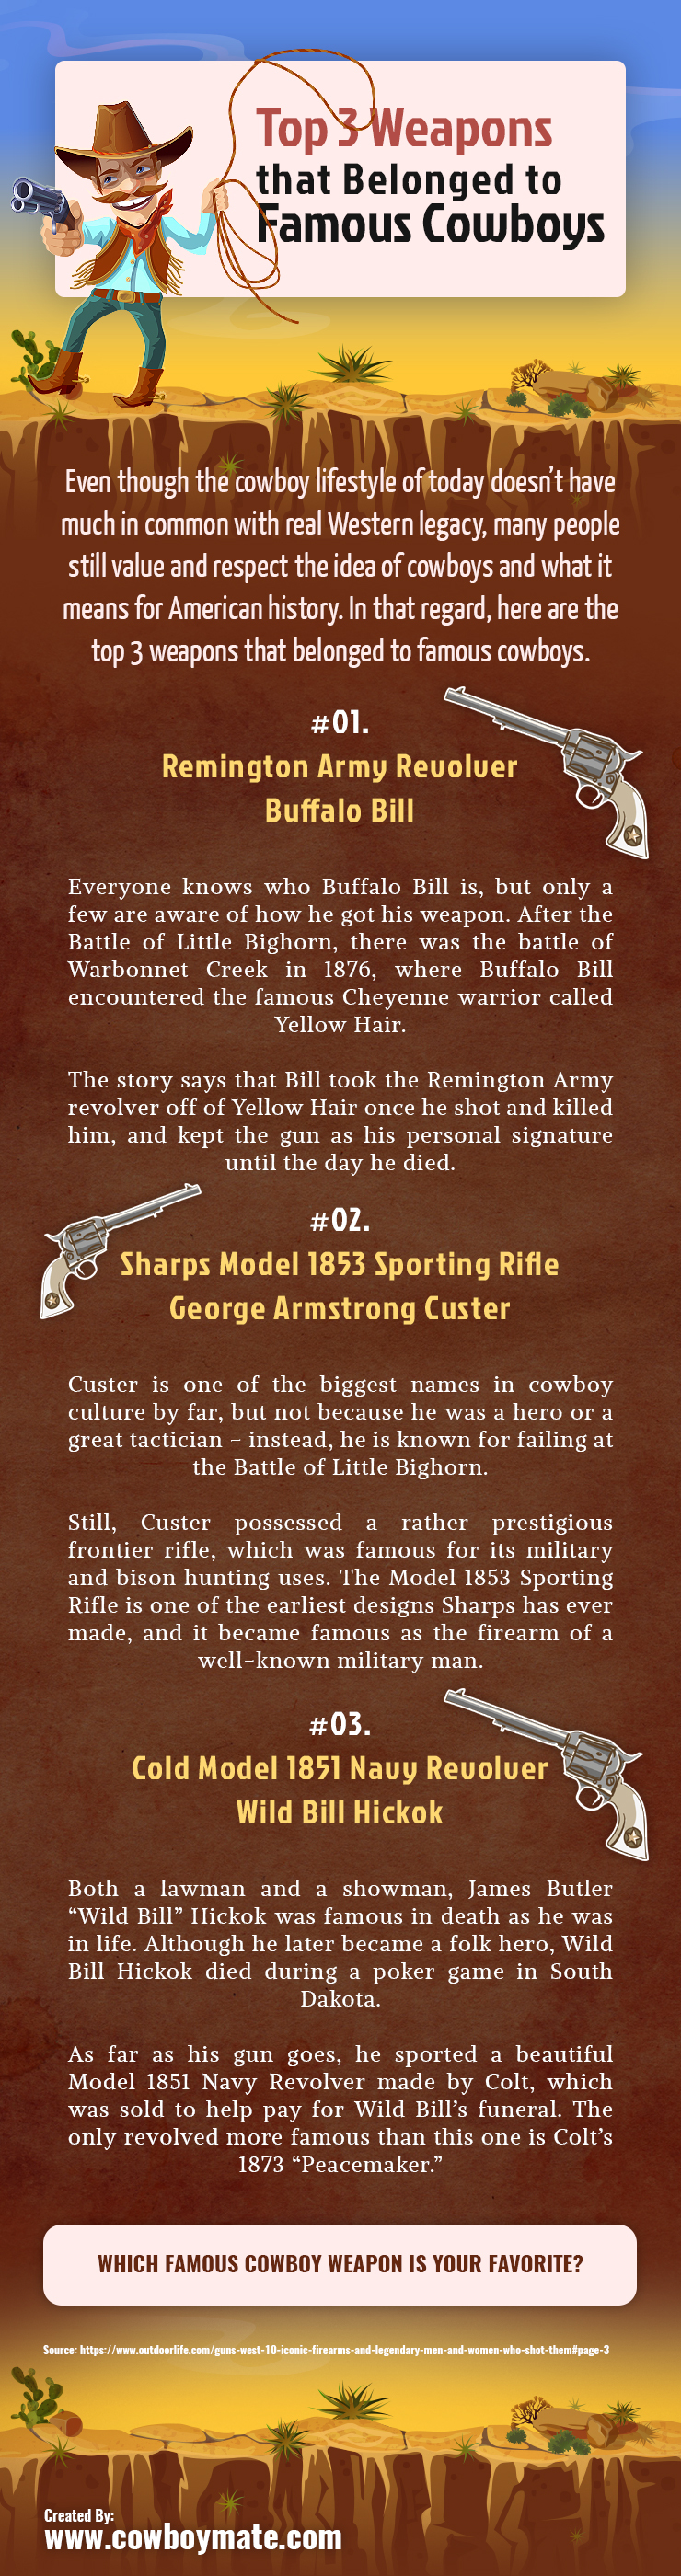 Top 3 Weapons that Belonged to Famous Cowboys